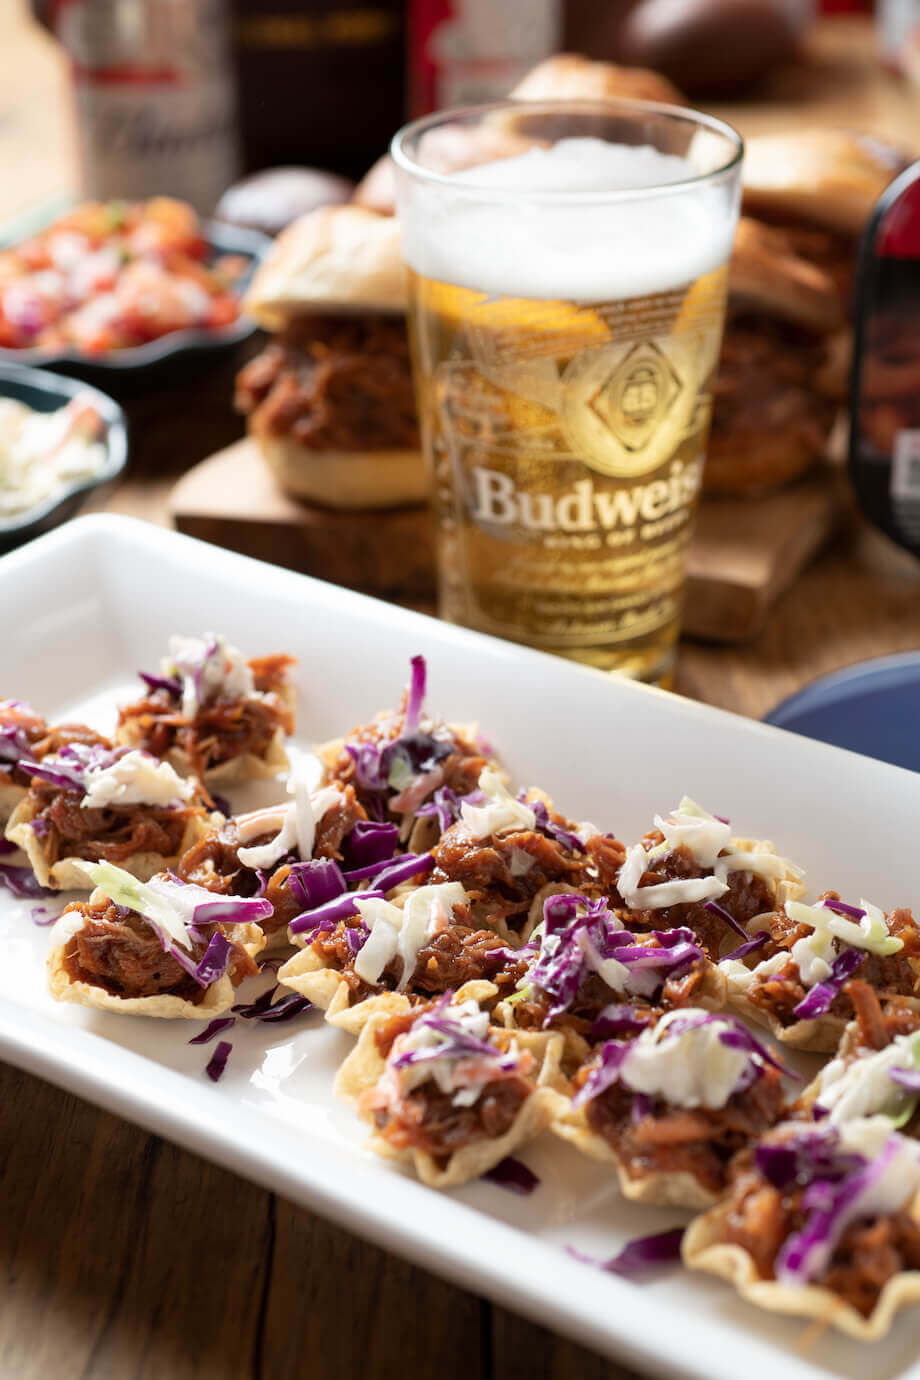 Pulled pork bites on a white serving plate next to a glass of beer